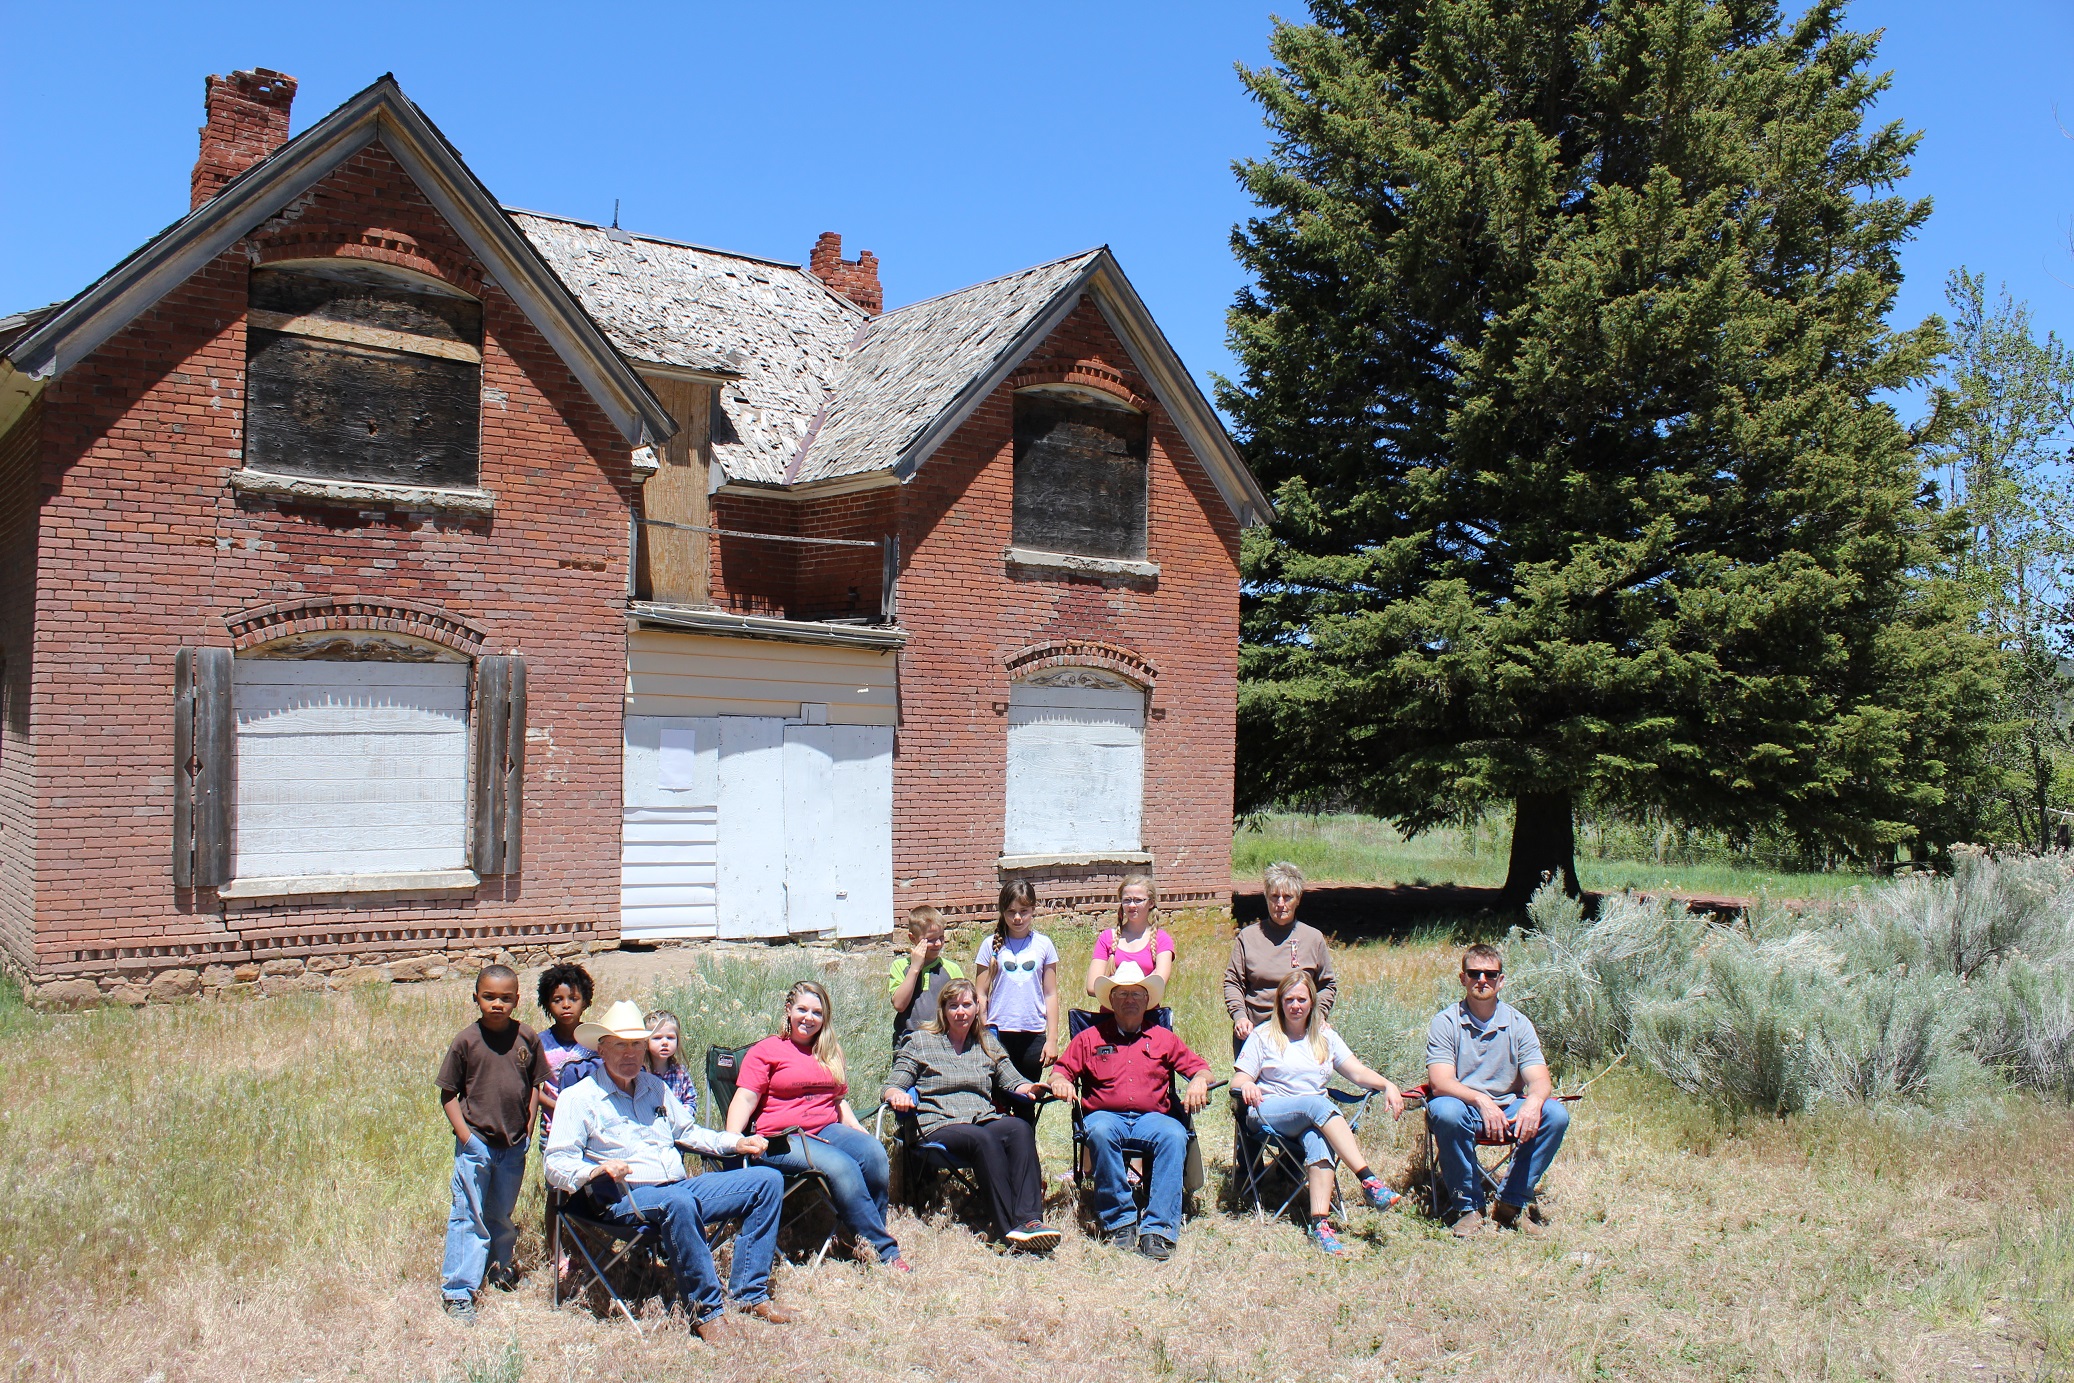 Front of the Page Ranch house with Page family descendants sitting in front